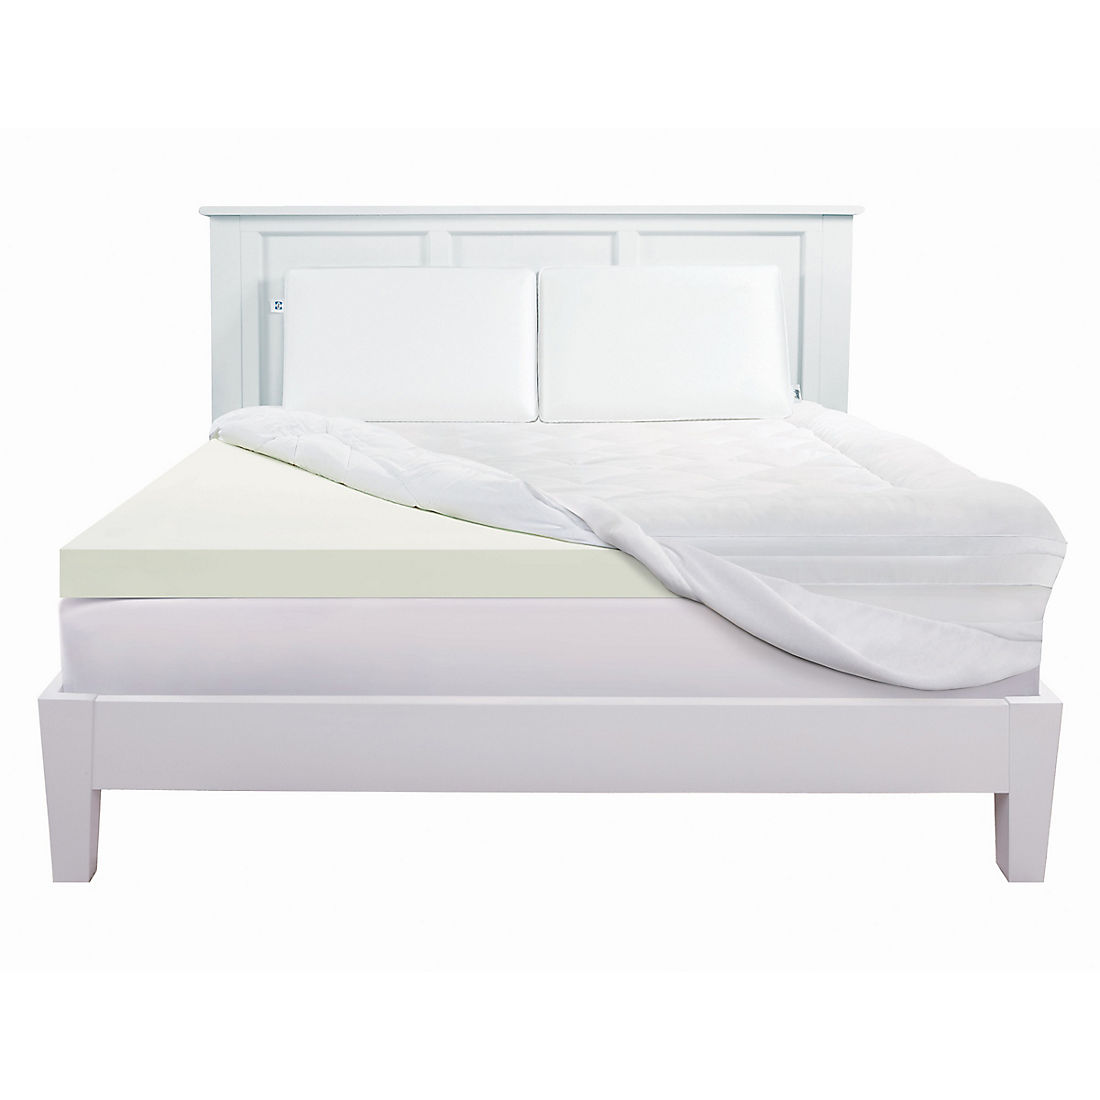 replacement cover for memory foam mattress